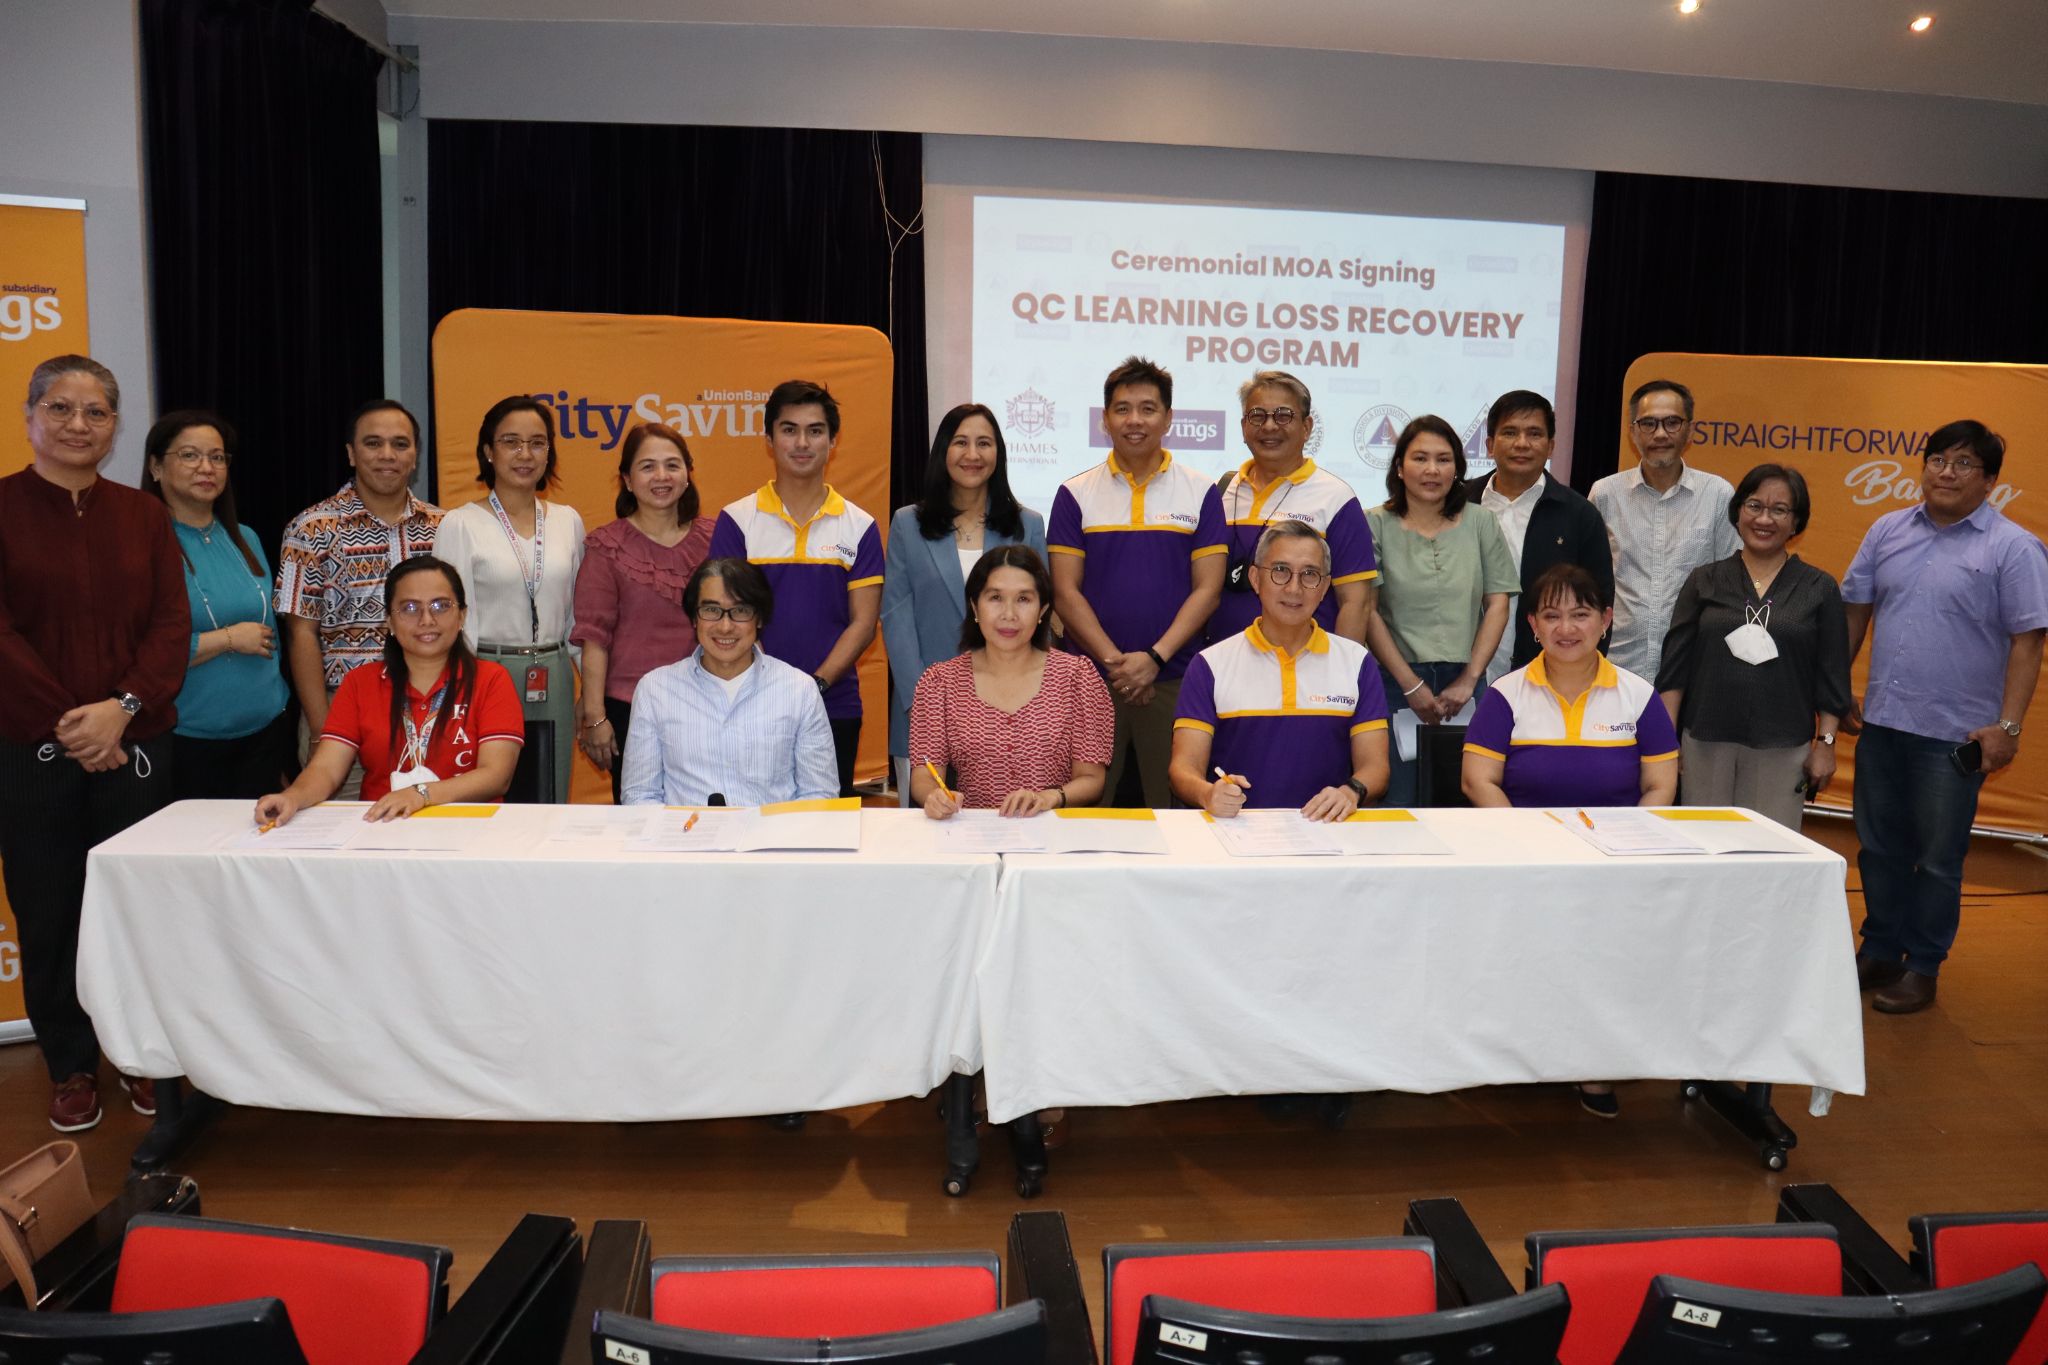 CitySavings and Thames International School partner with Quezon City LGU for  Pilot Learning Loss Recovery Program in the Philippines